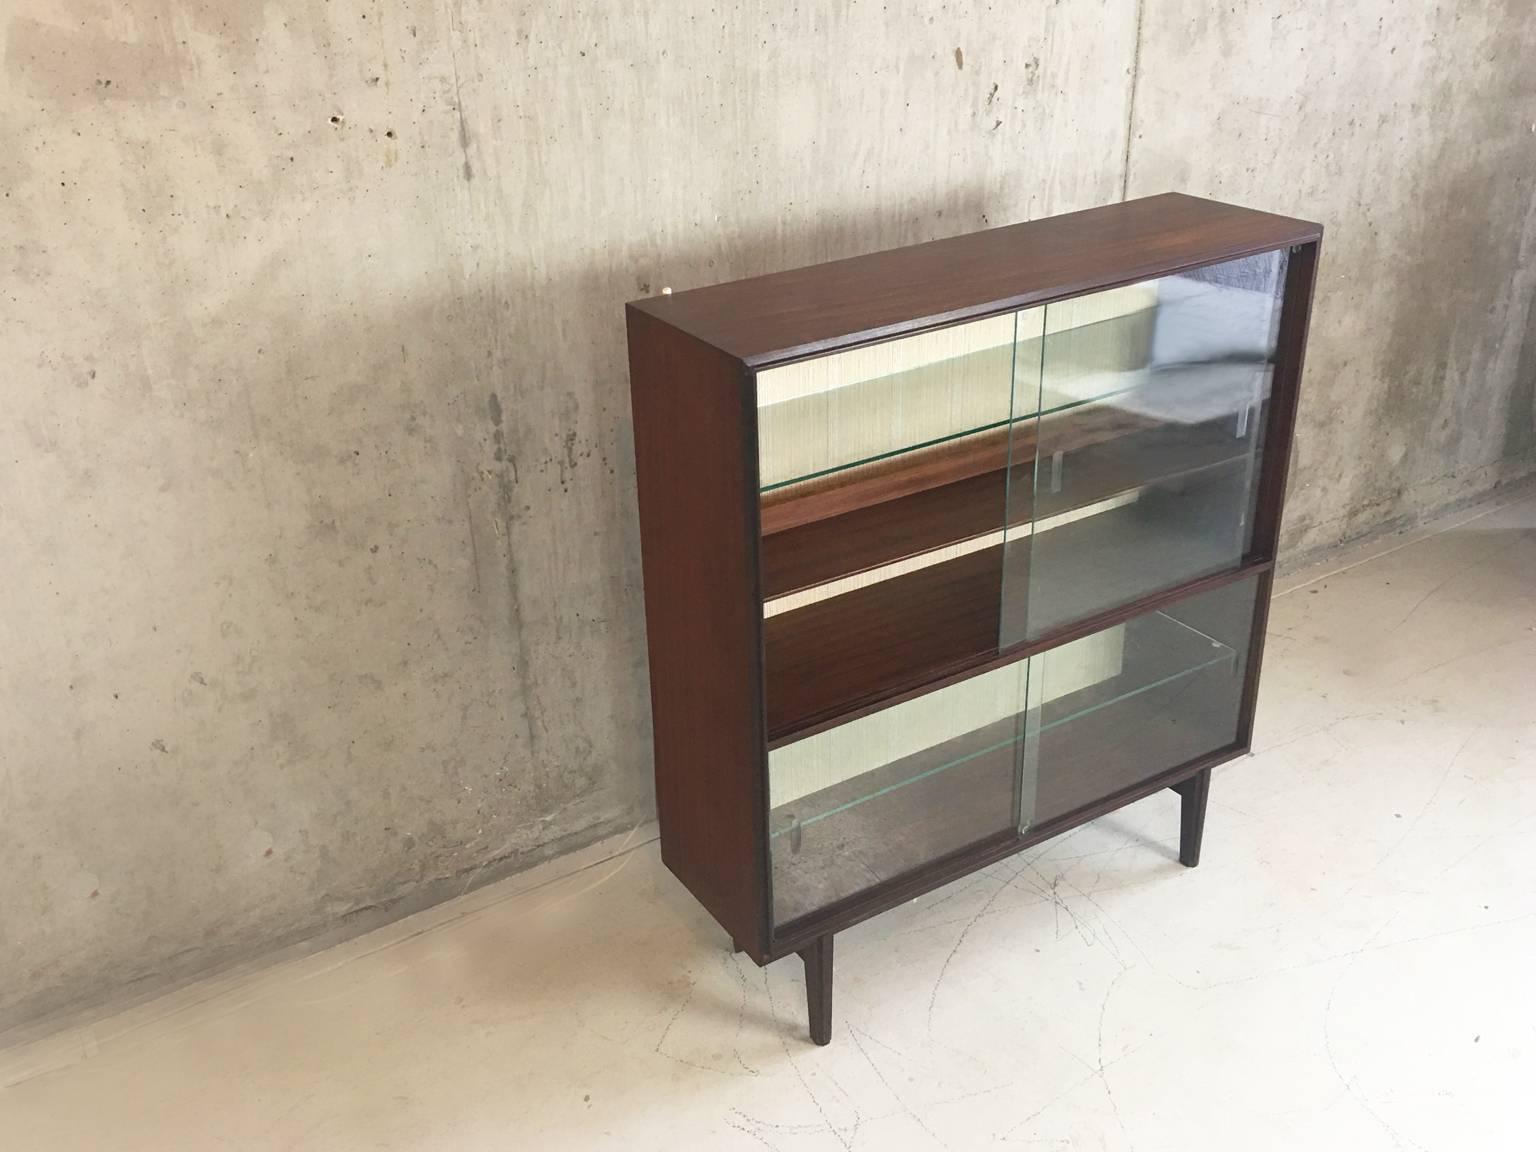 A very stylish dark wood cabinet manufactured by English furniture maker Beaver and Tapley, part of the 'Multi Width' range designed by Robert Heritage. Can be used as a book case, display cabinet or drinks cabinet. The interior of the cabinet is